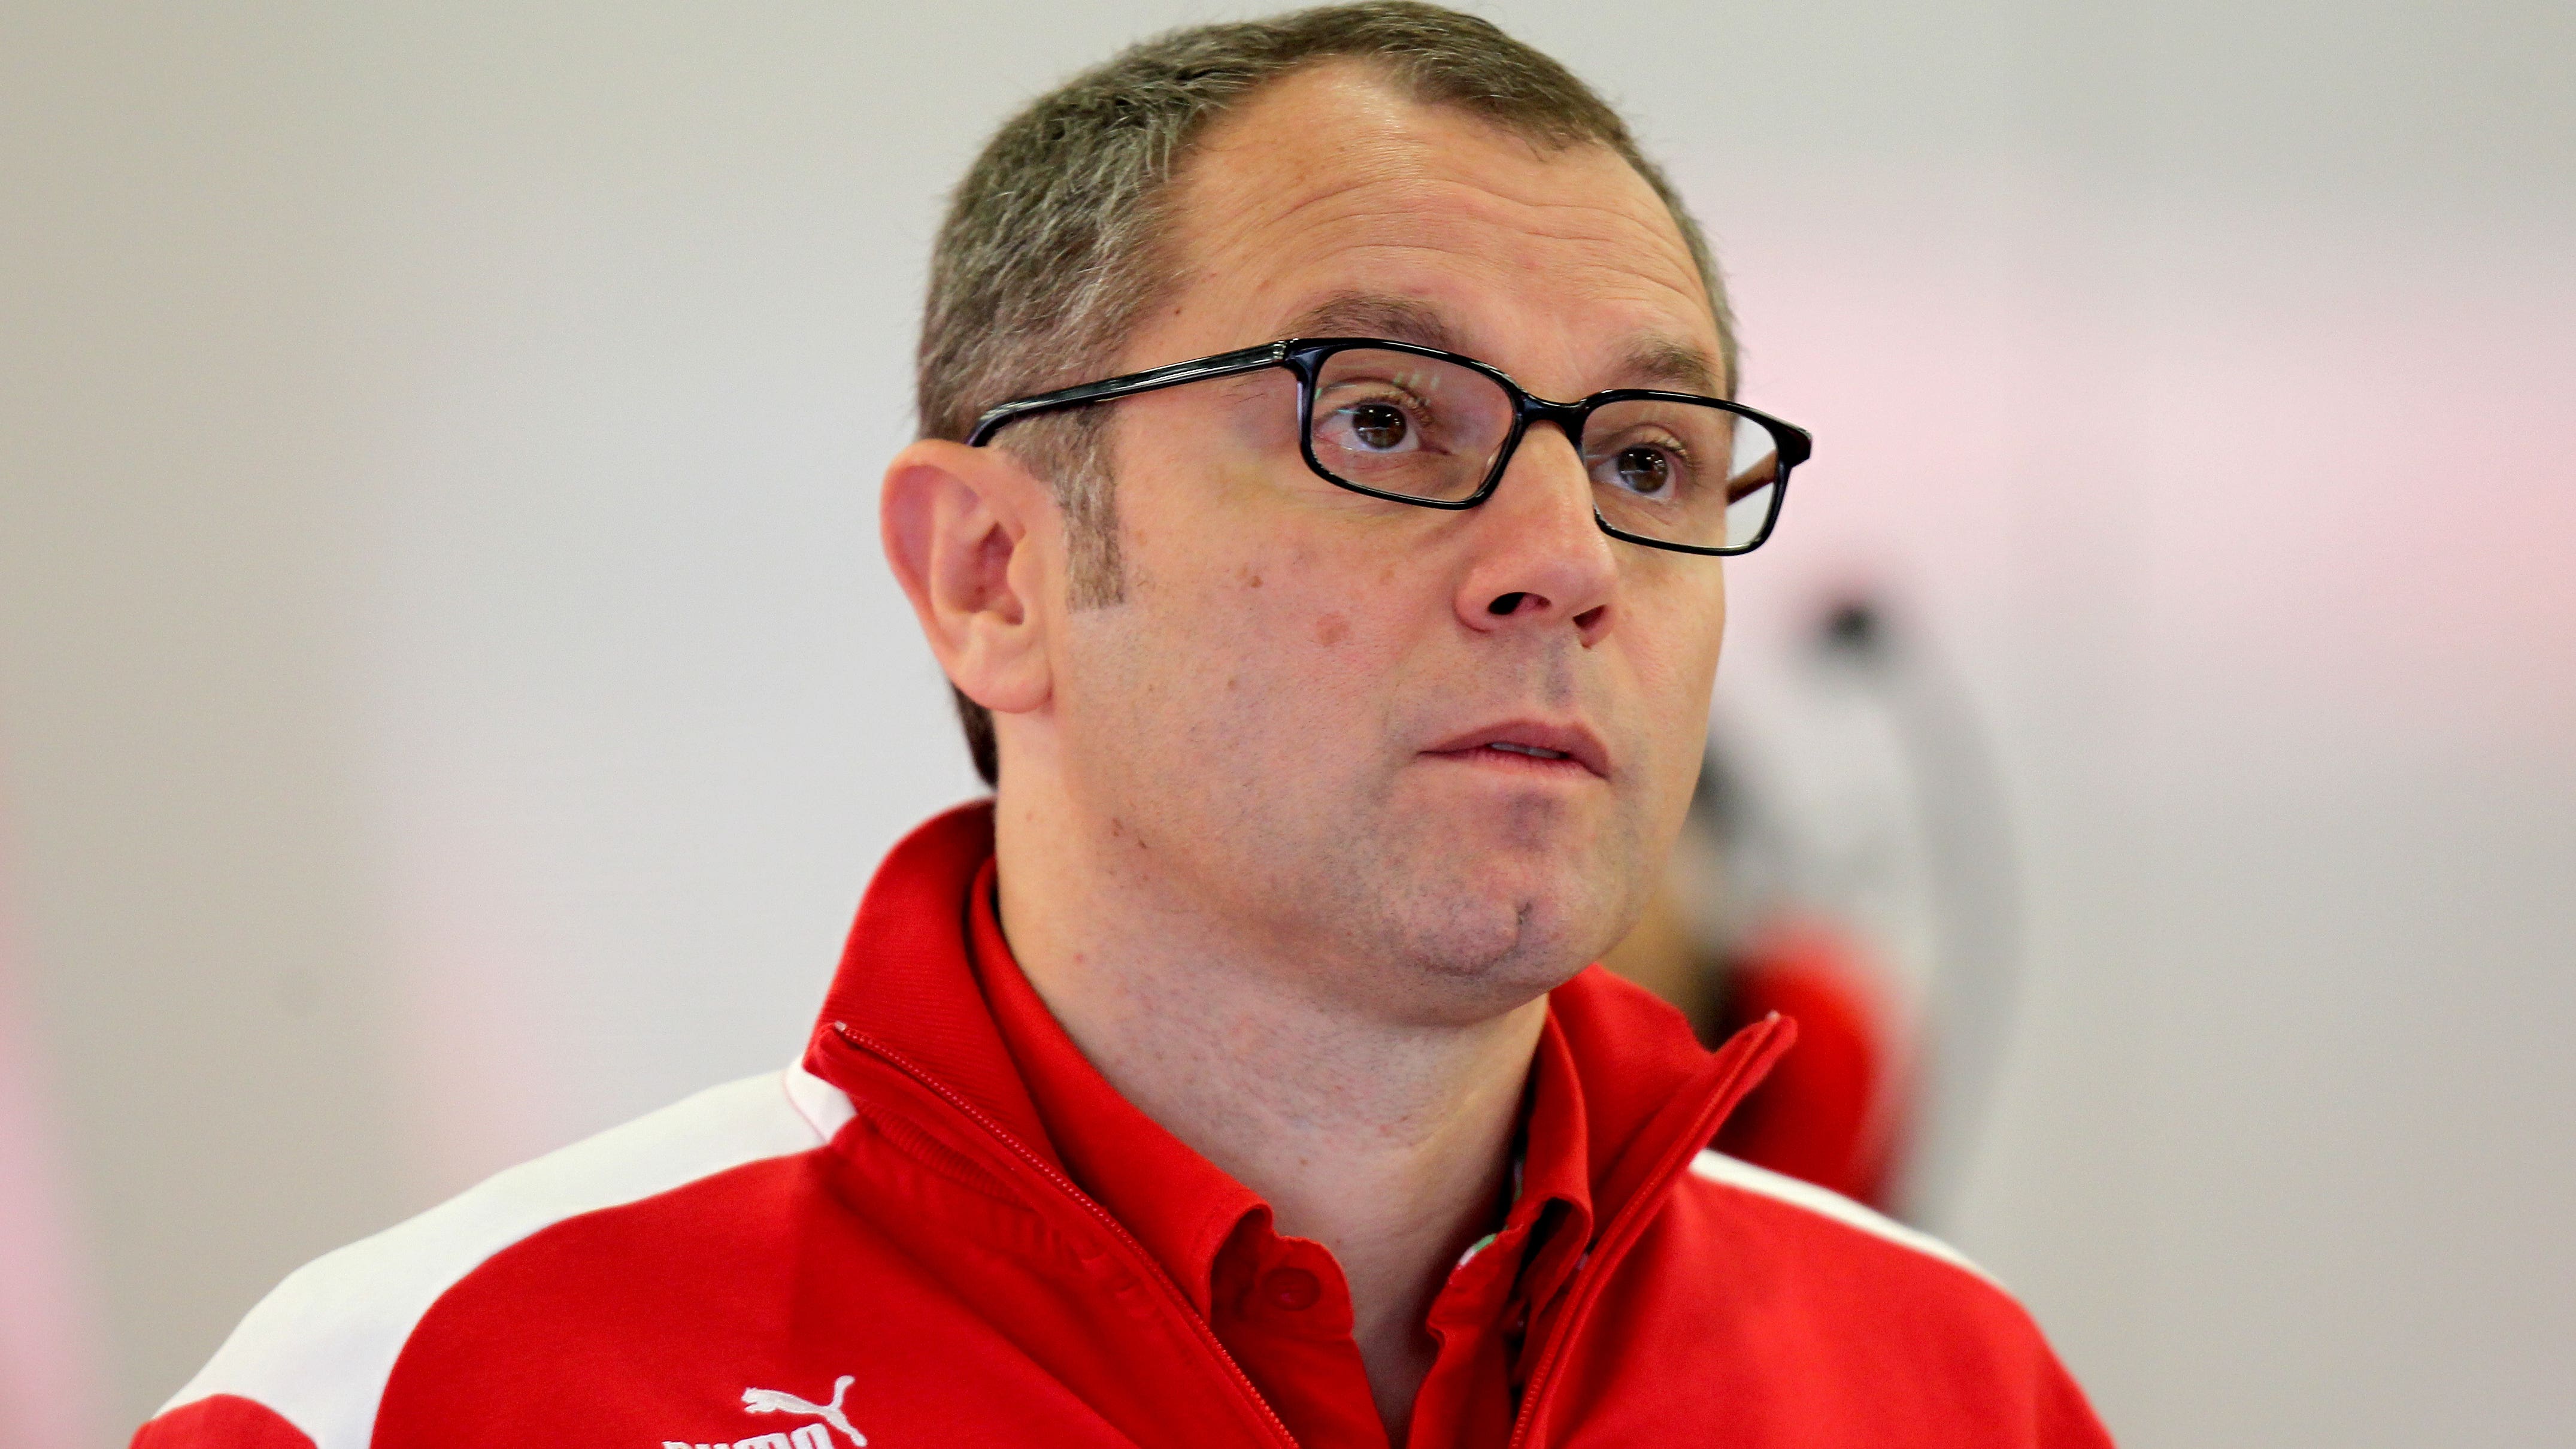 Stefano Domenicali to new boss of Formula One BT Sport